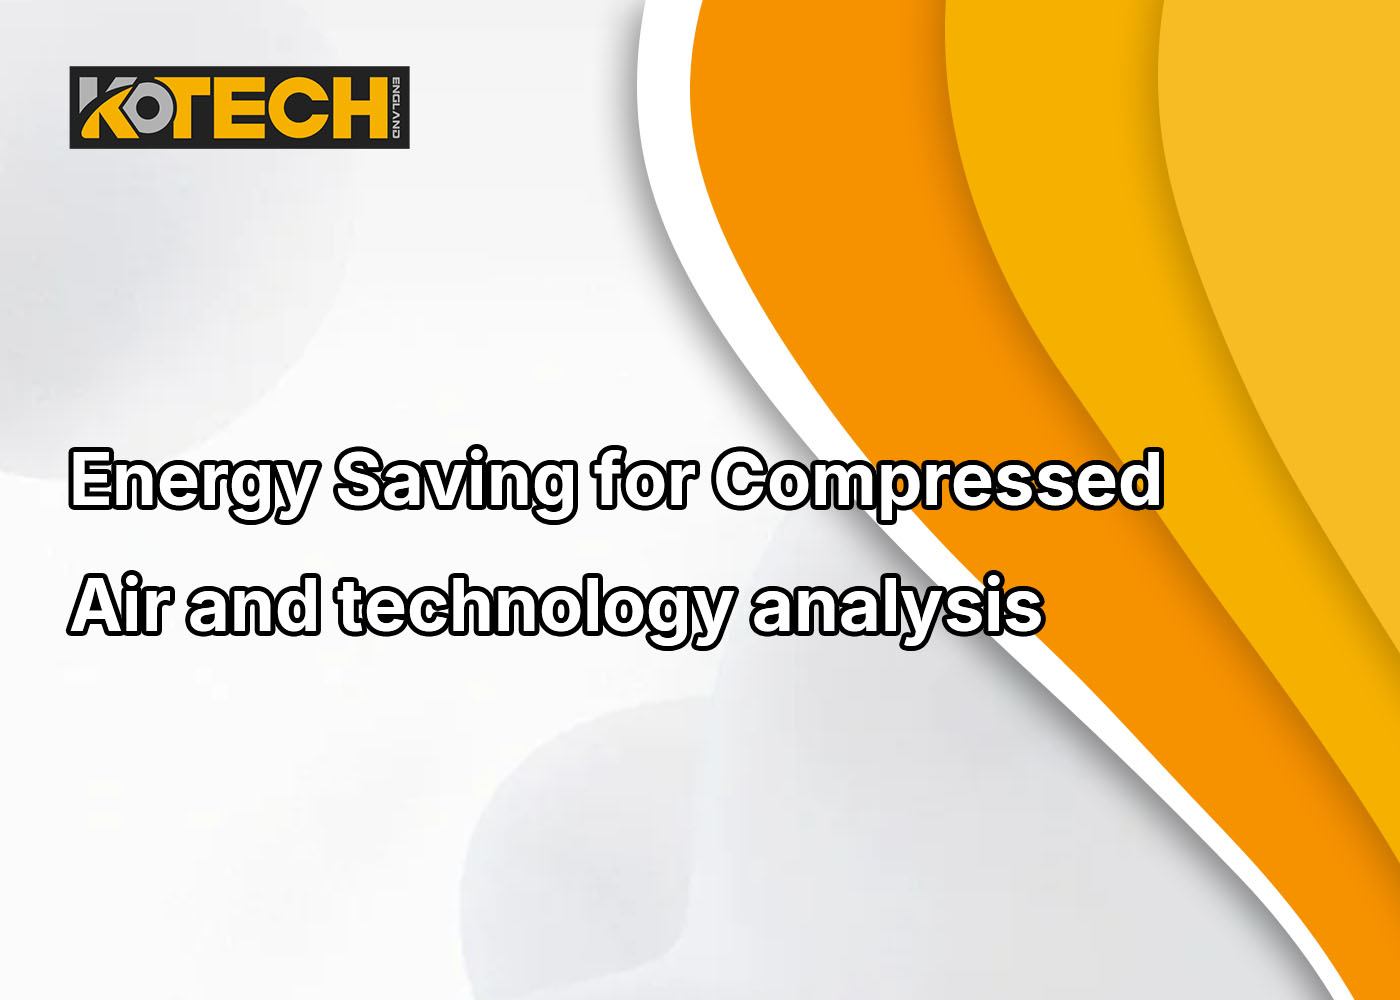 Energy Saving for Compressed Air and technology analysis